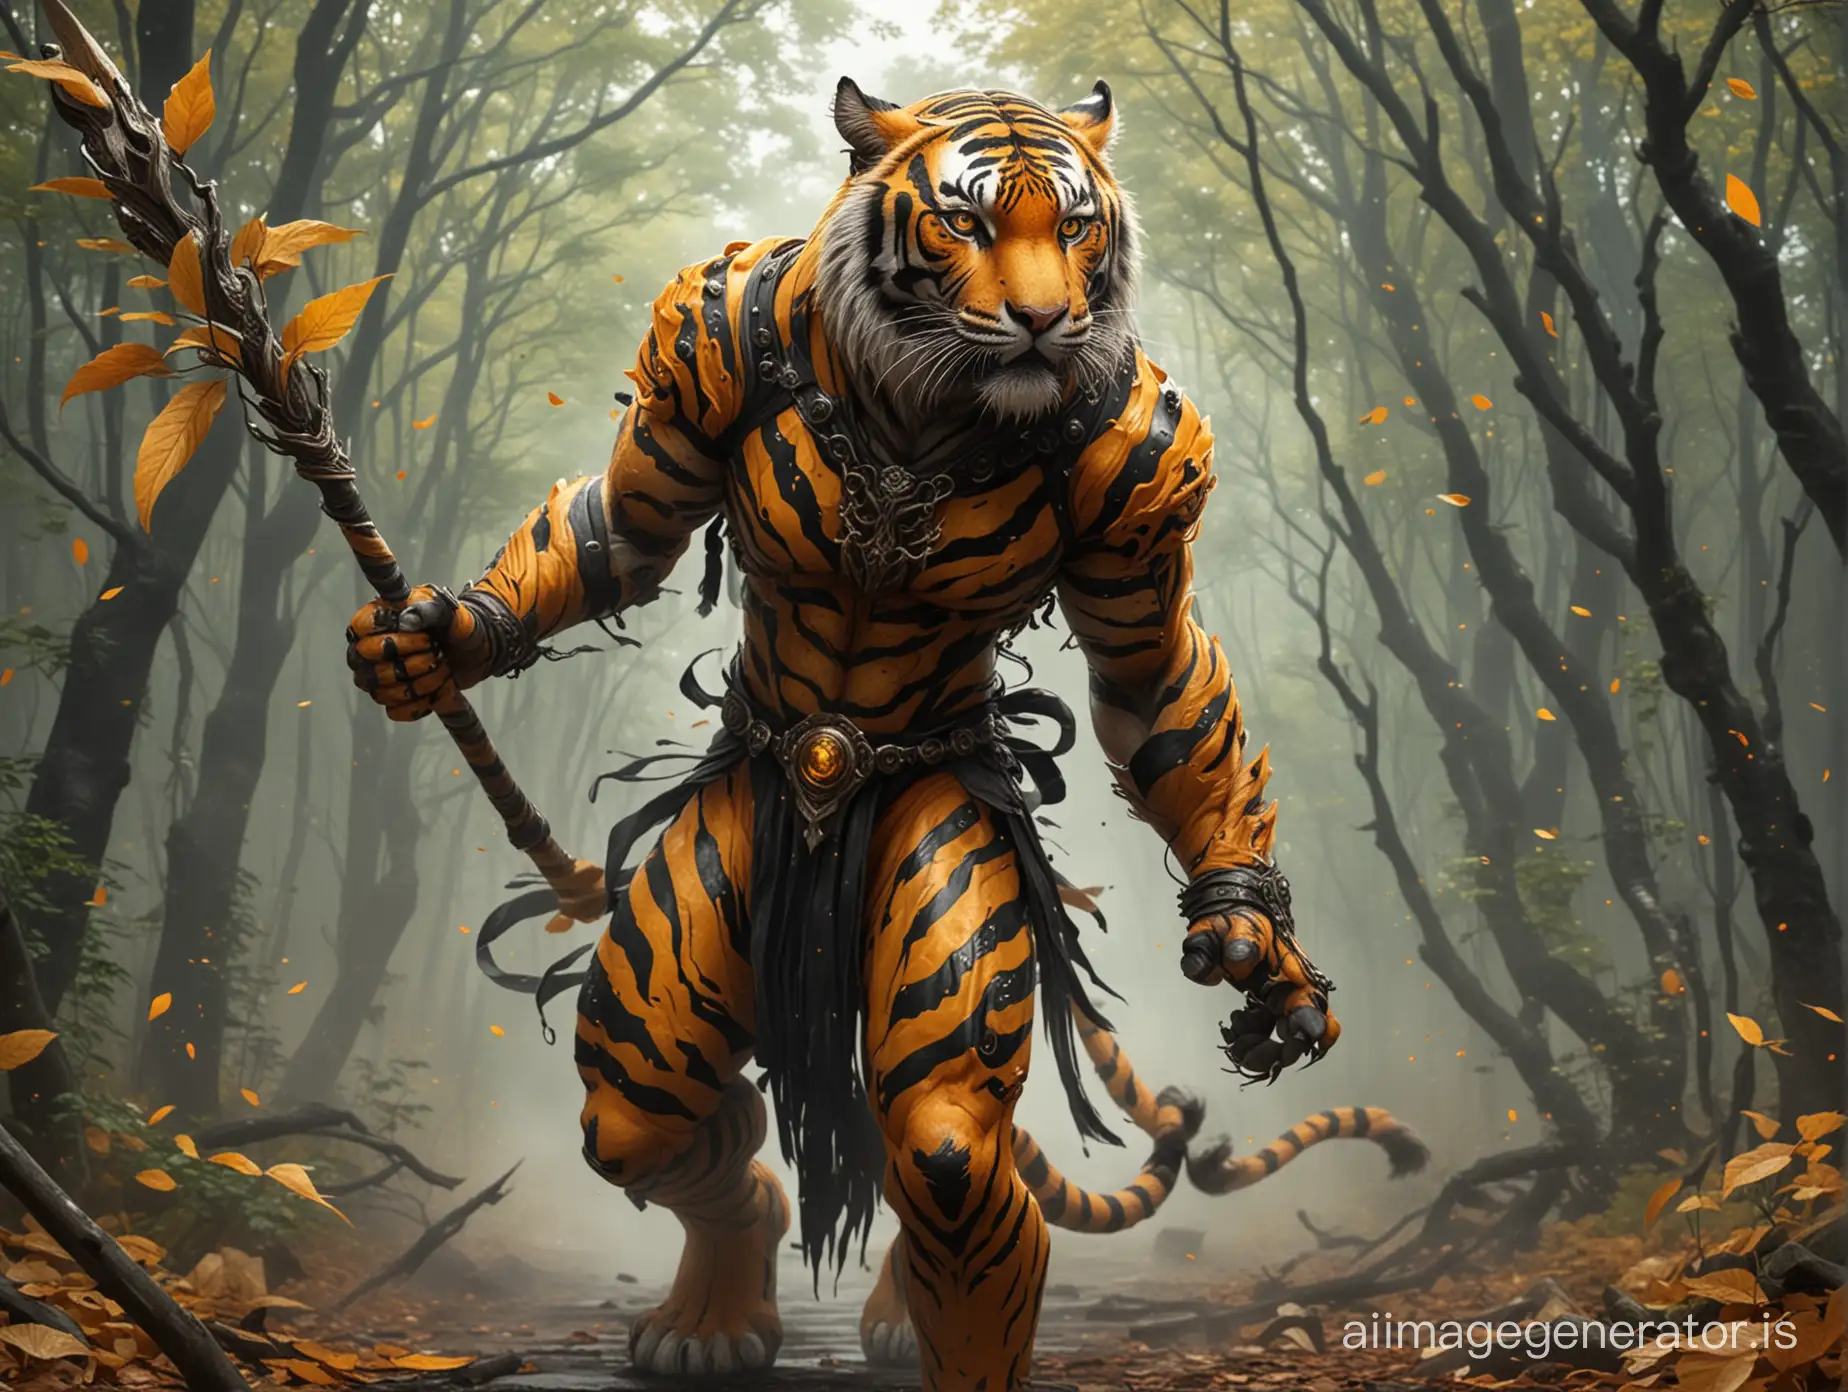 Orange with black stripes humanoid tiger with yellow eyes. A wizards staff in his hand. Leaves swirling.